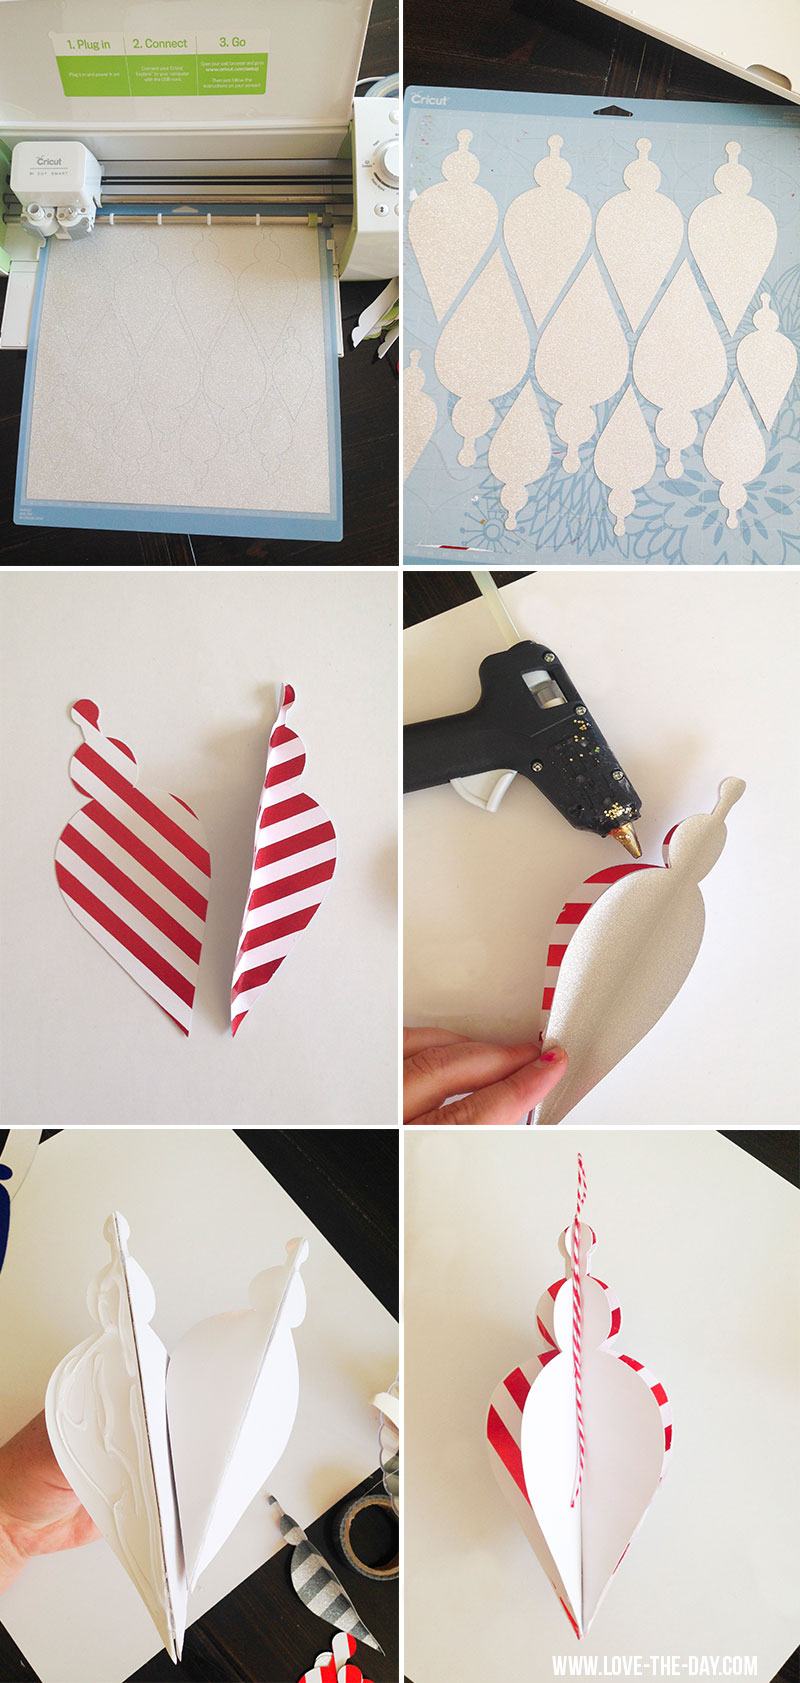 DIY Paper Ornament by Love The Day